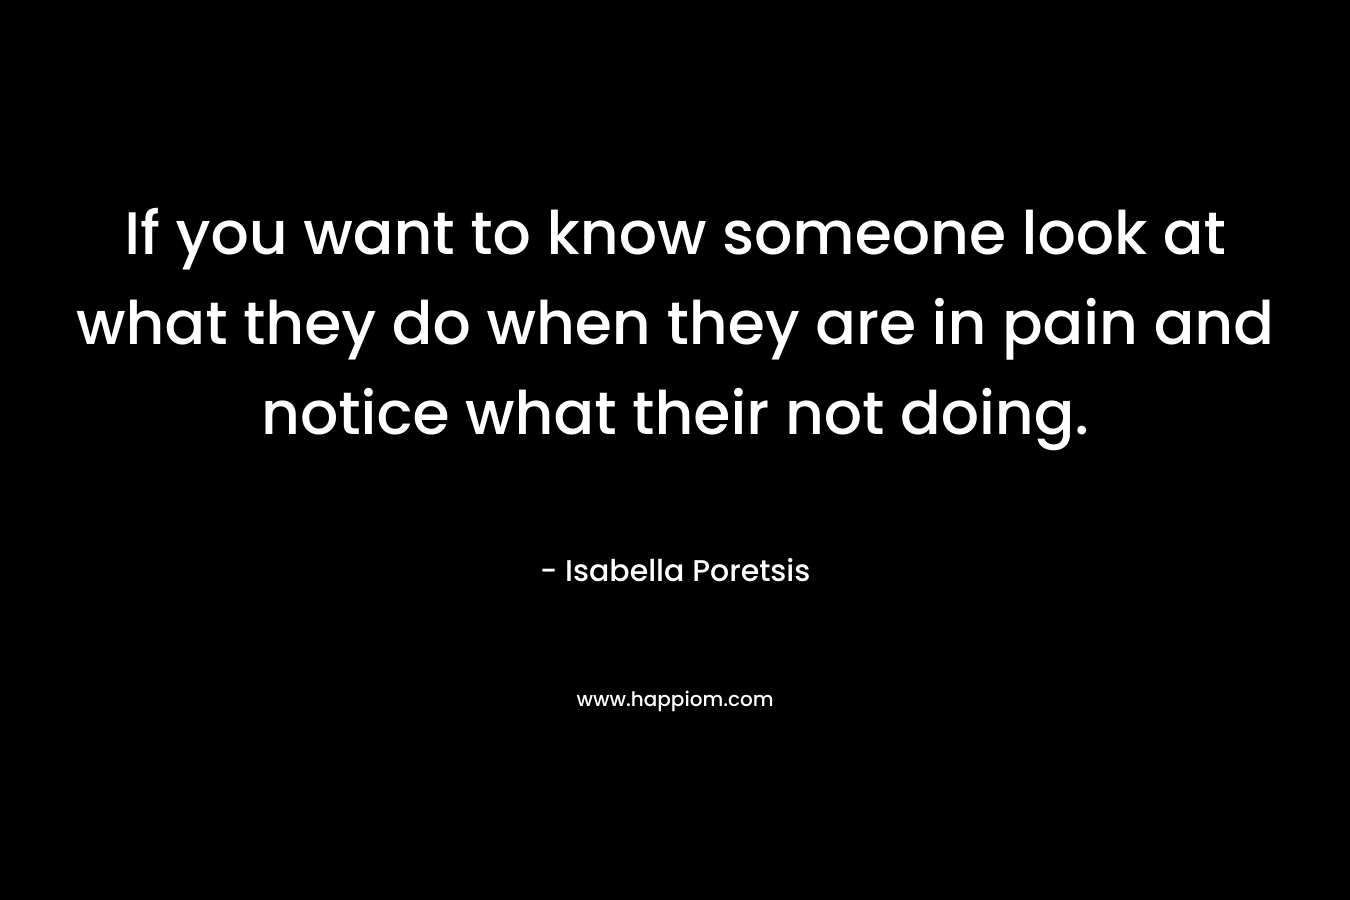 If you want to know someone look at what they do when they are in pain and notice what their not doing. – Isabella Poretsis